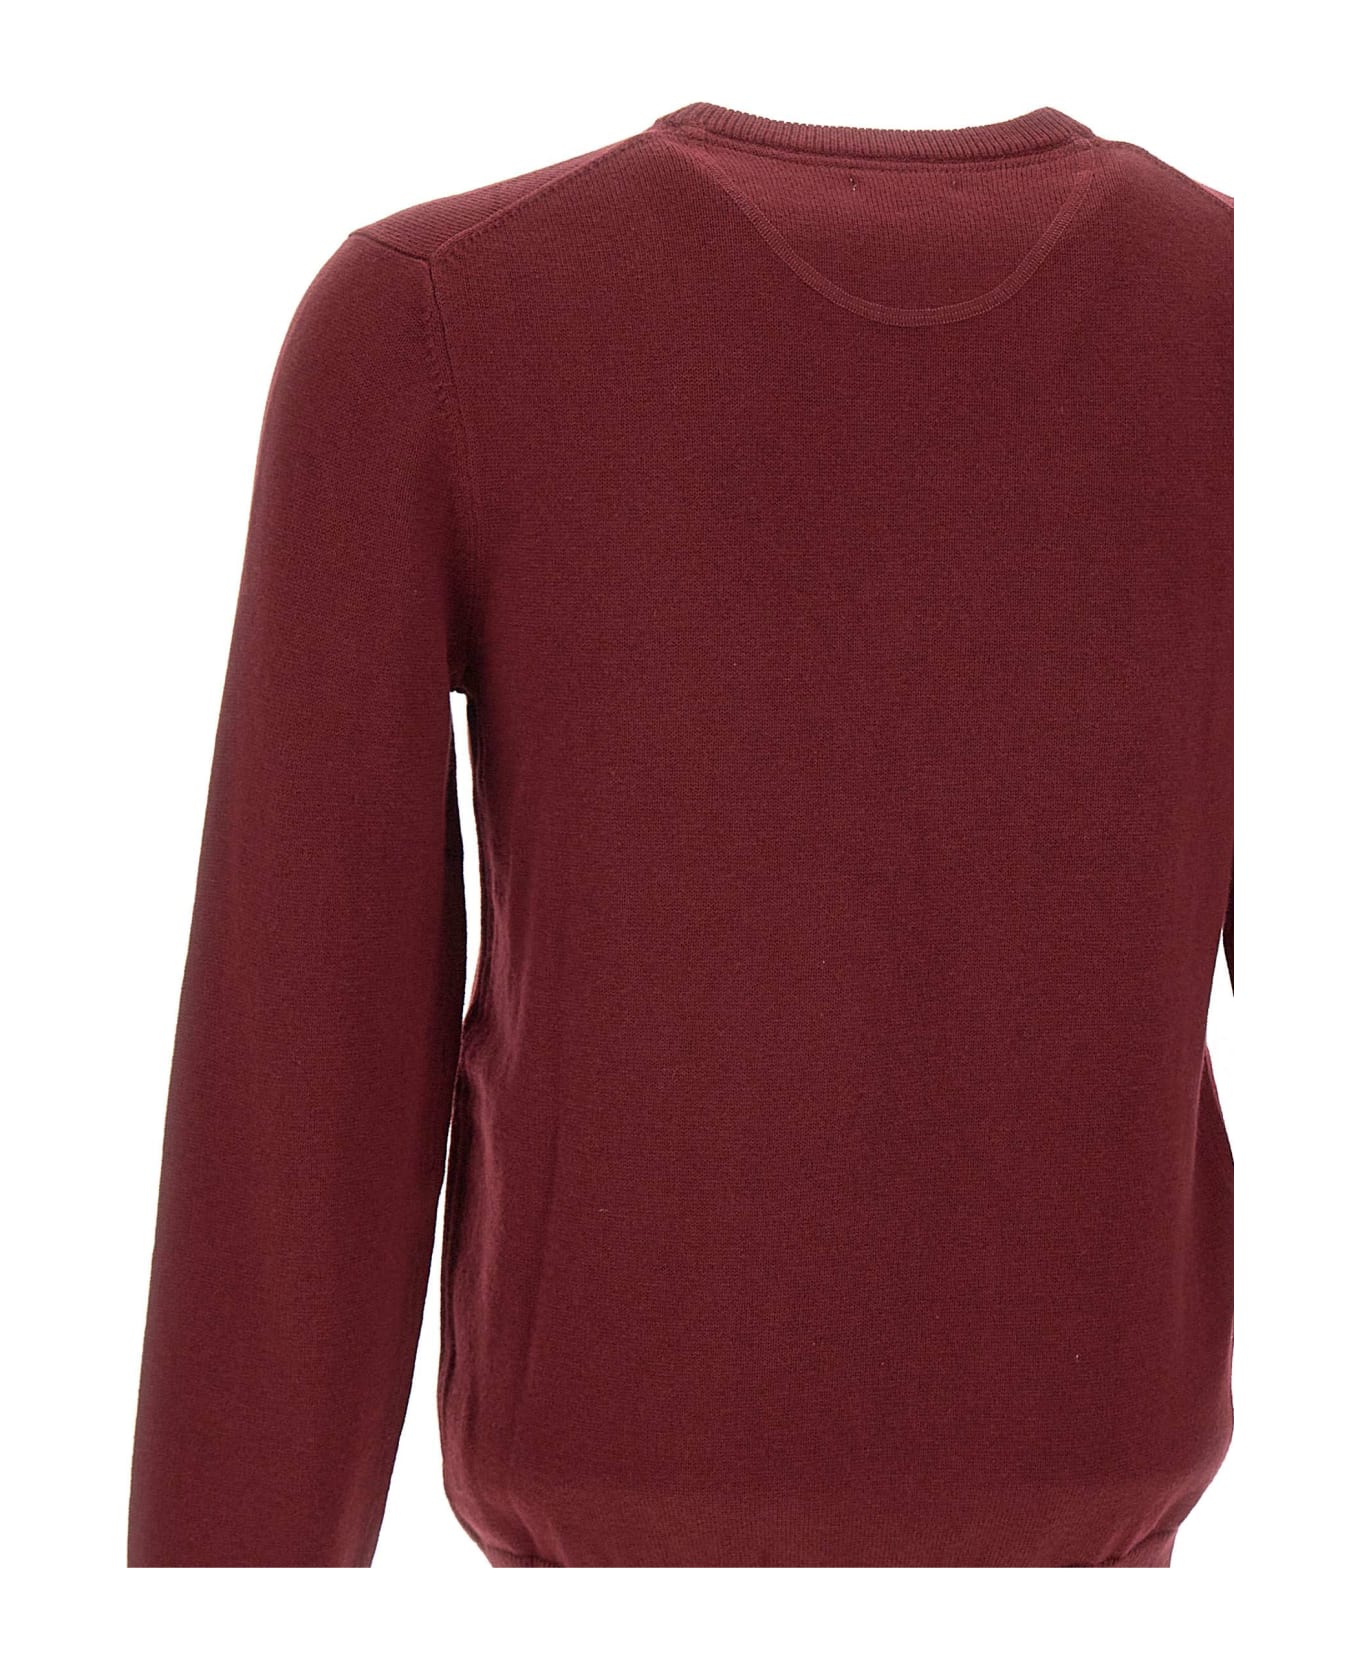 Sun 68 Cotton And Wool Sweater - RED